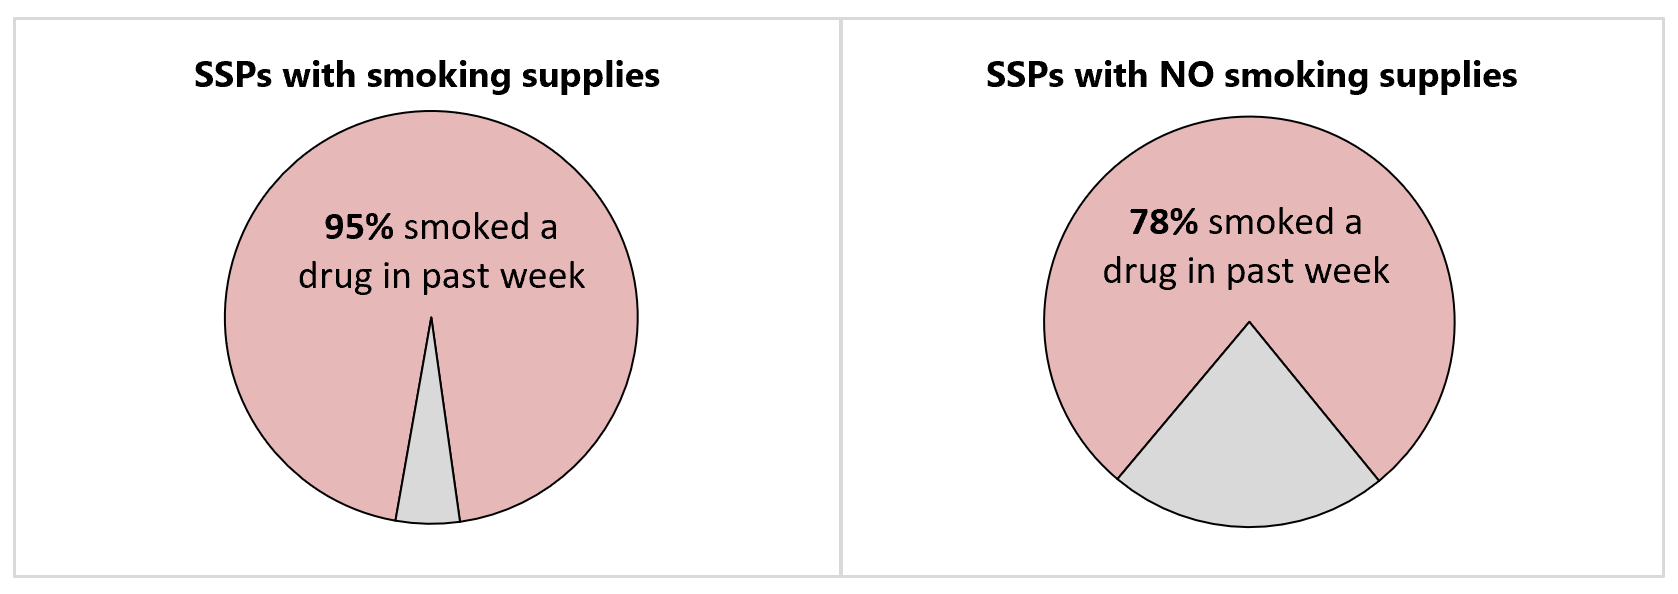 Figure 6: Percentage of participants who smoked a drug in past week, by SSP type. SSPs with smoking supplies: 95% smoked a drug in the past week. SSPs with NO smoking supplies, 78% smoked a drug in the past week.